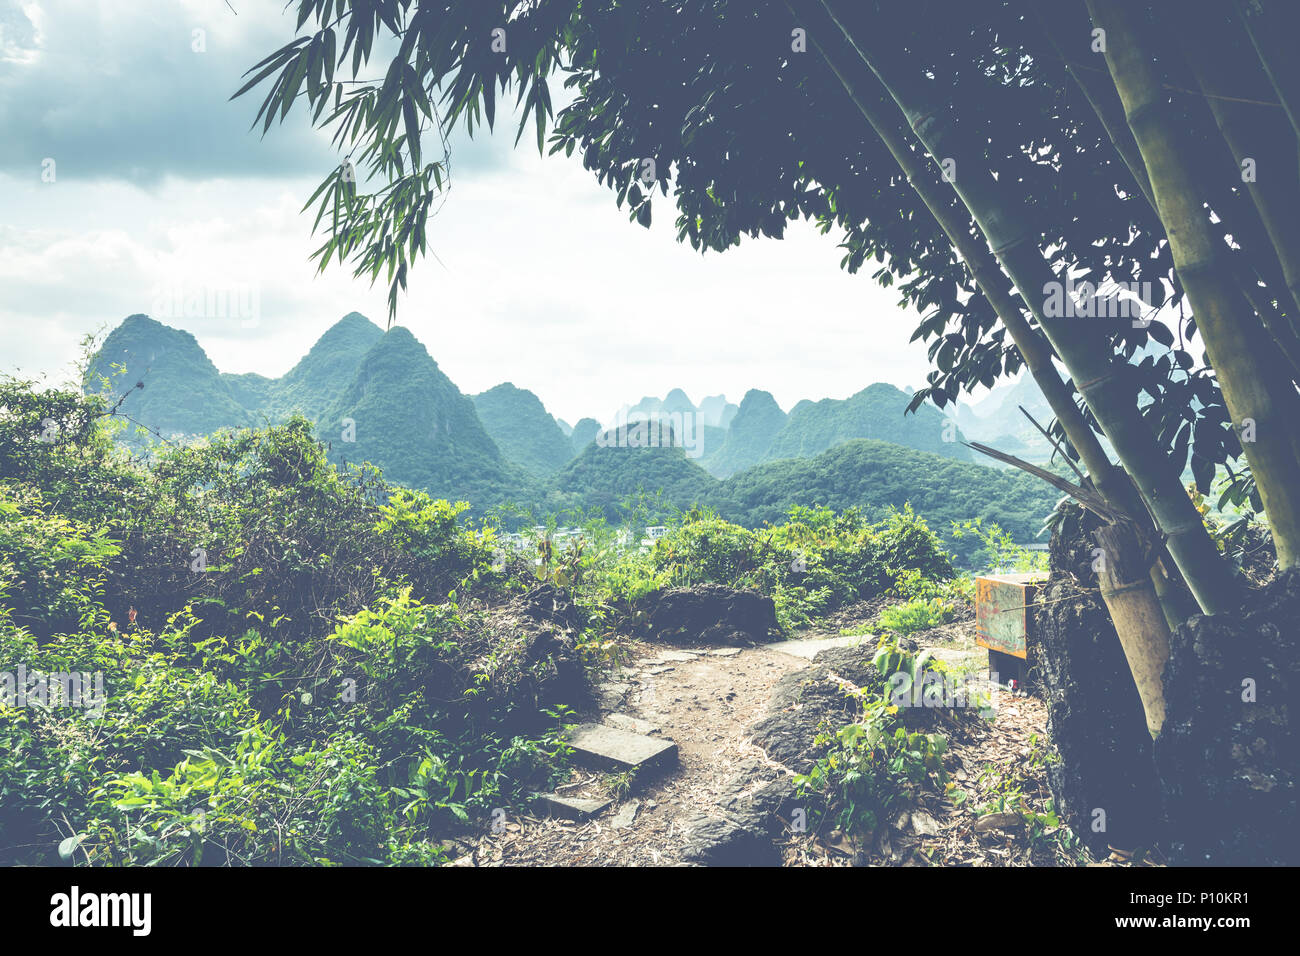 Landscape of Guilin, Karst mountains. Located near Yangshuo, Guilin, Guangxi, China. Stock Photo